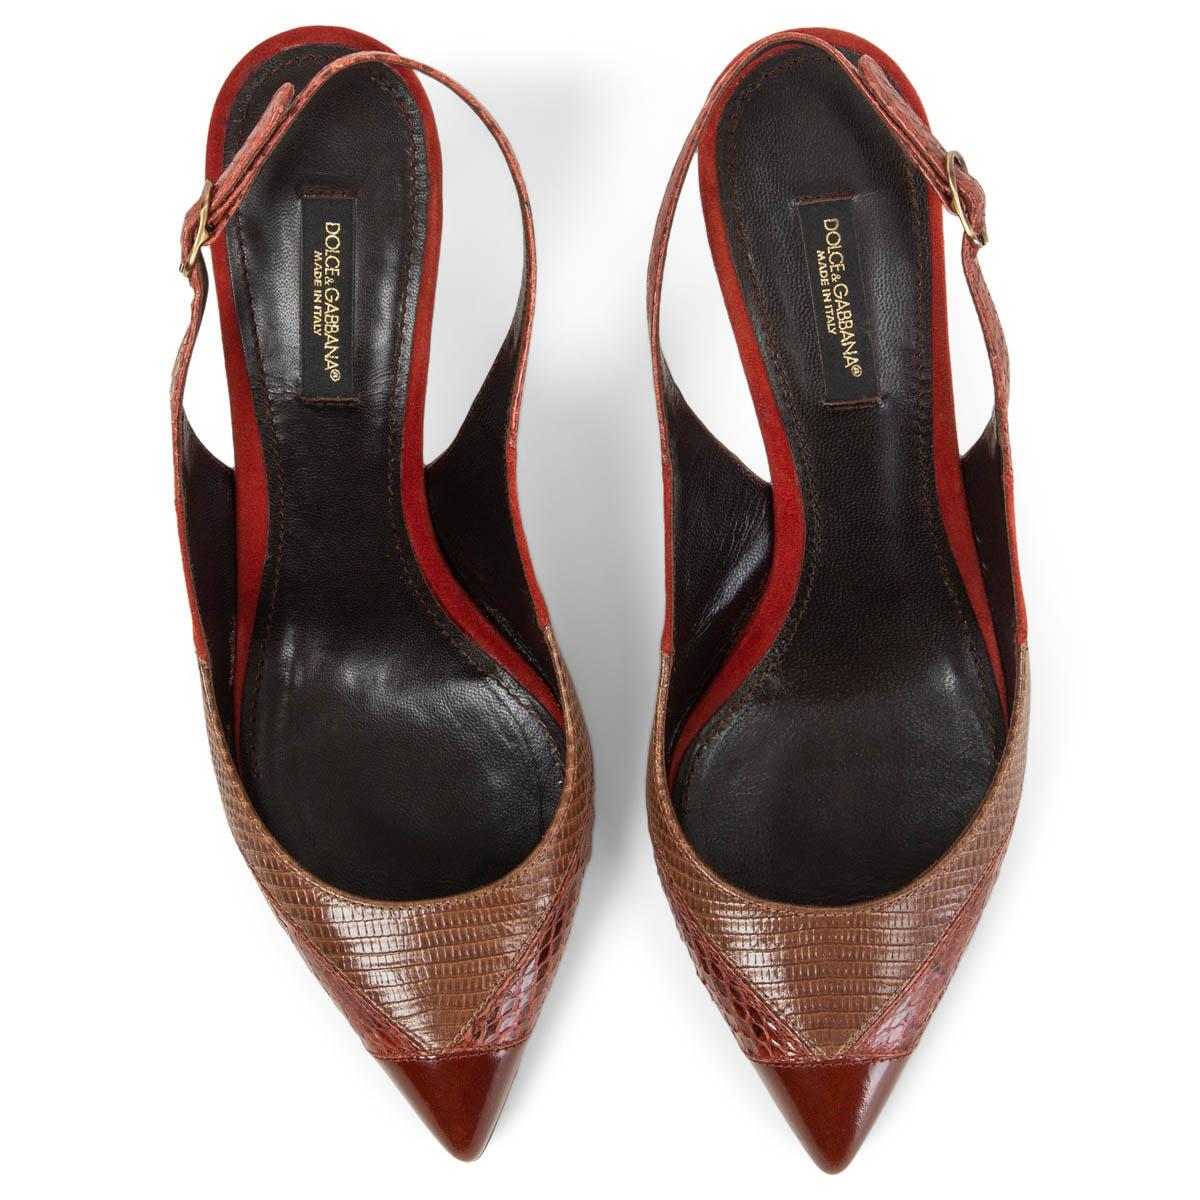 DOLCE and GABBANA red Snakeskin Lizard PATCHWORK POINTED TOE Pumps ...